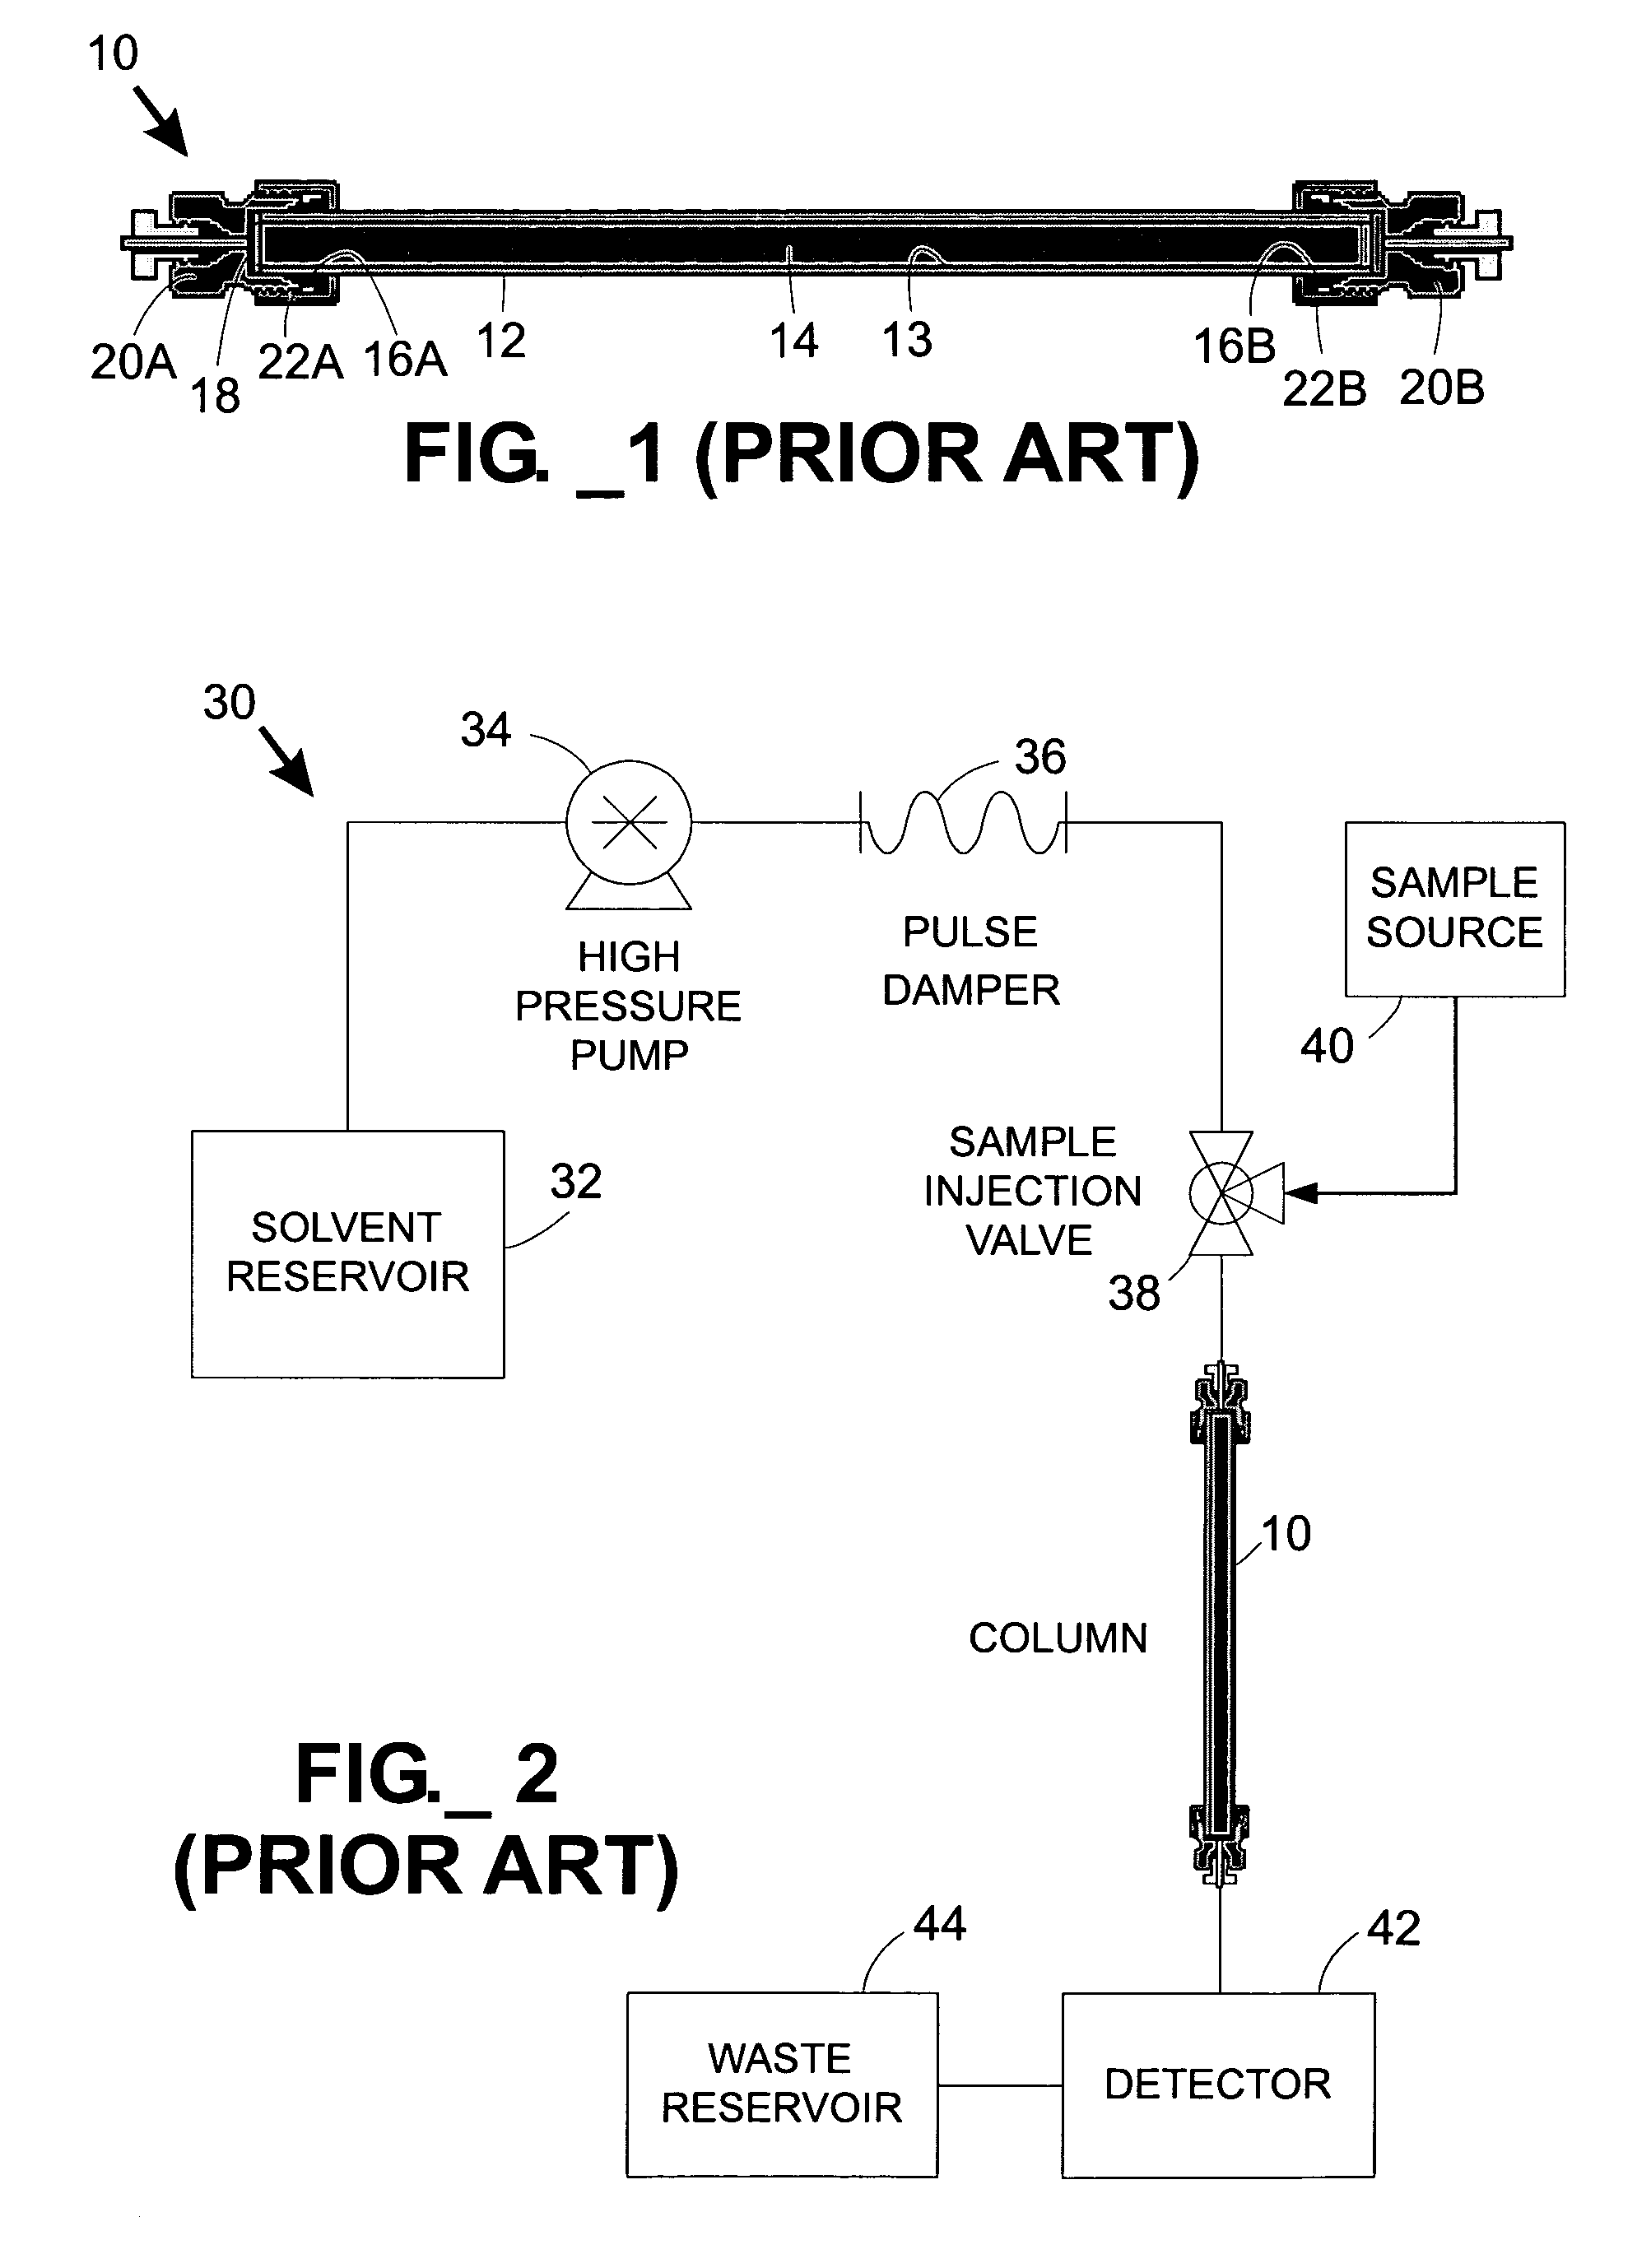 Parallel fluid processing systems and methods